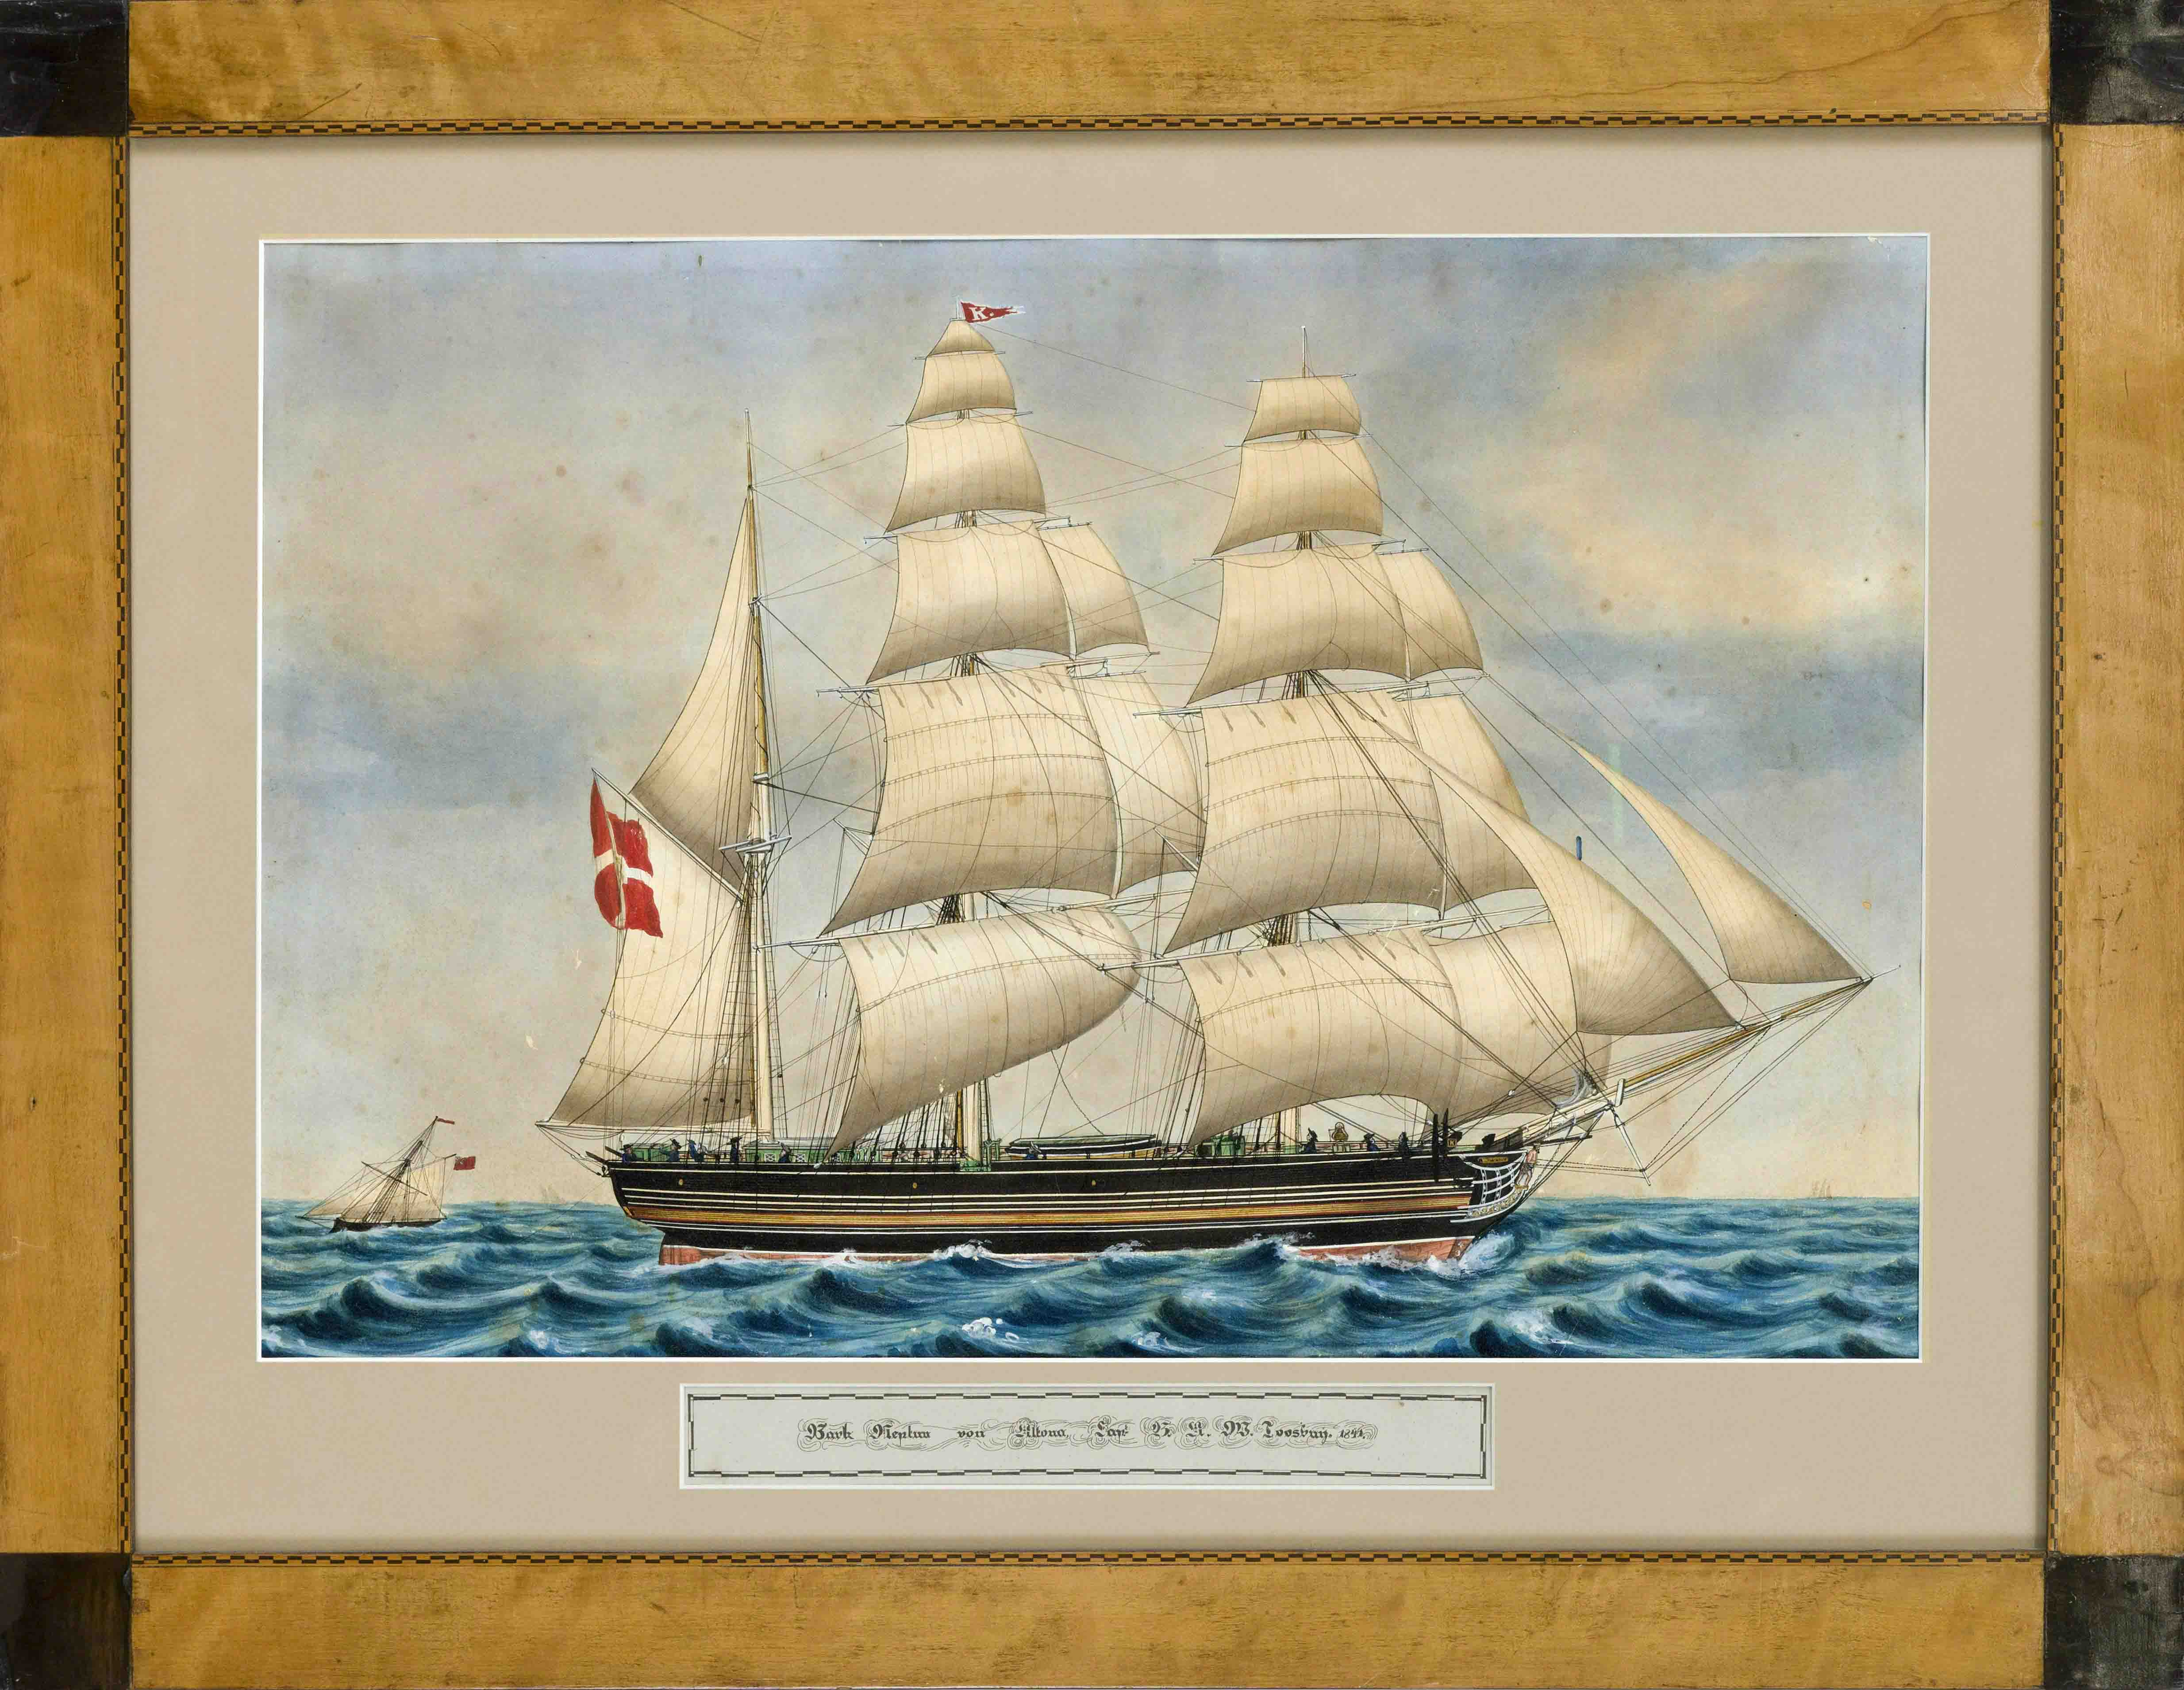 Captain's picture of the 19th century, ship portrait of the barque Neptun from Altona Capt.